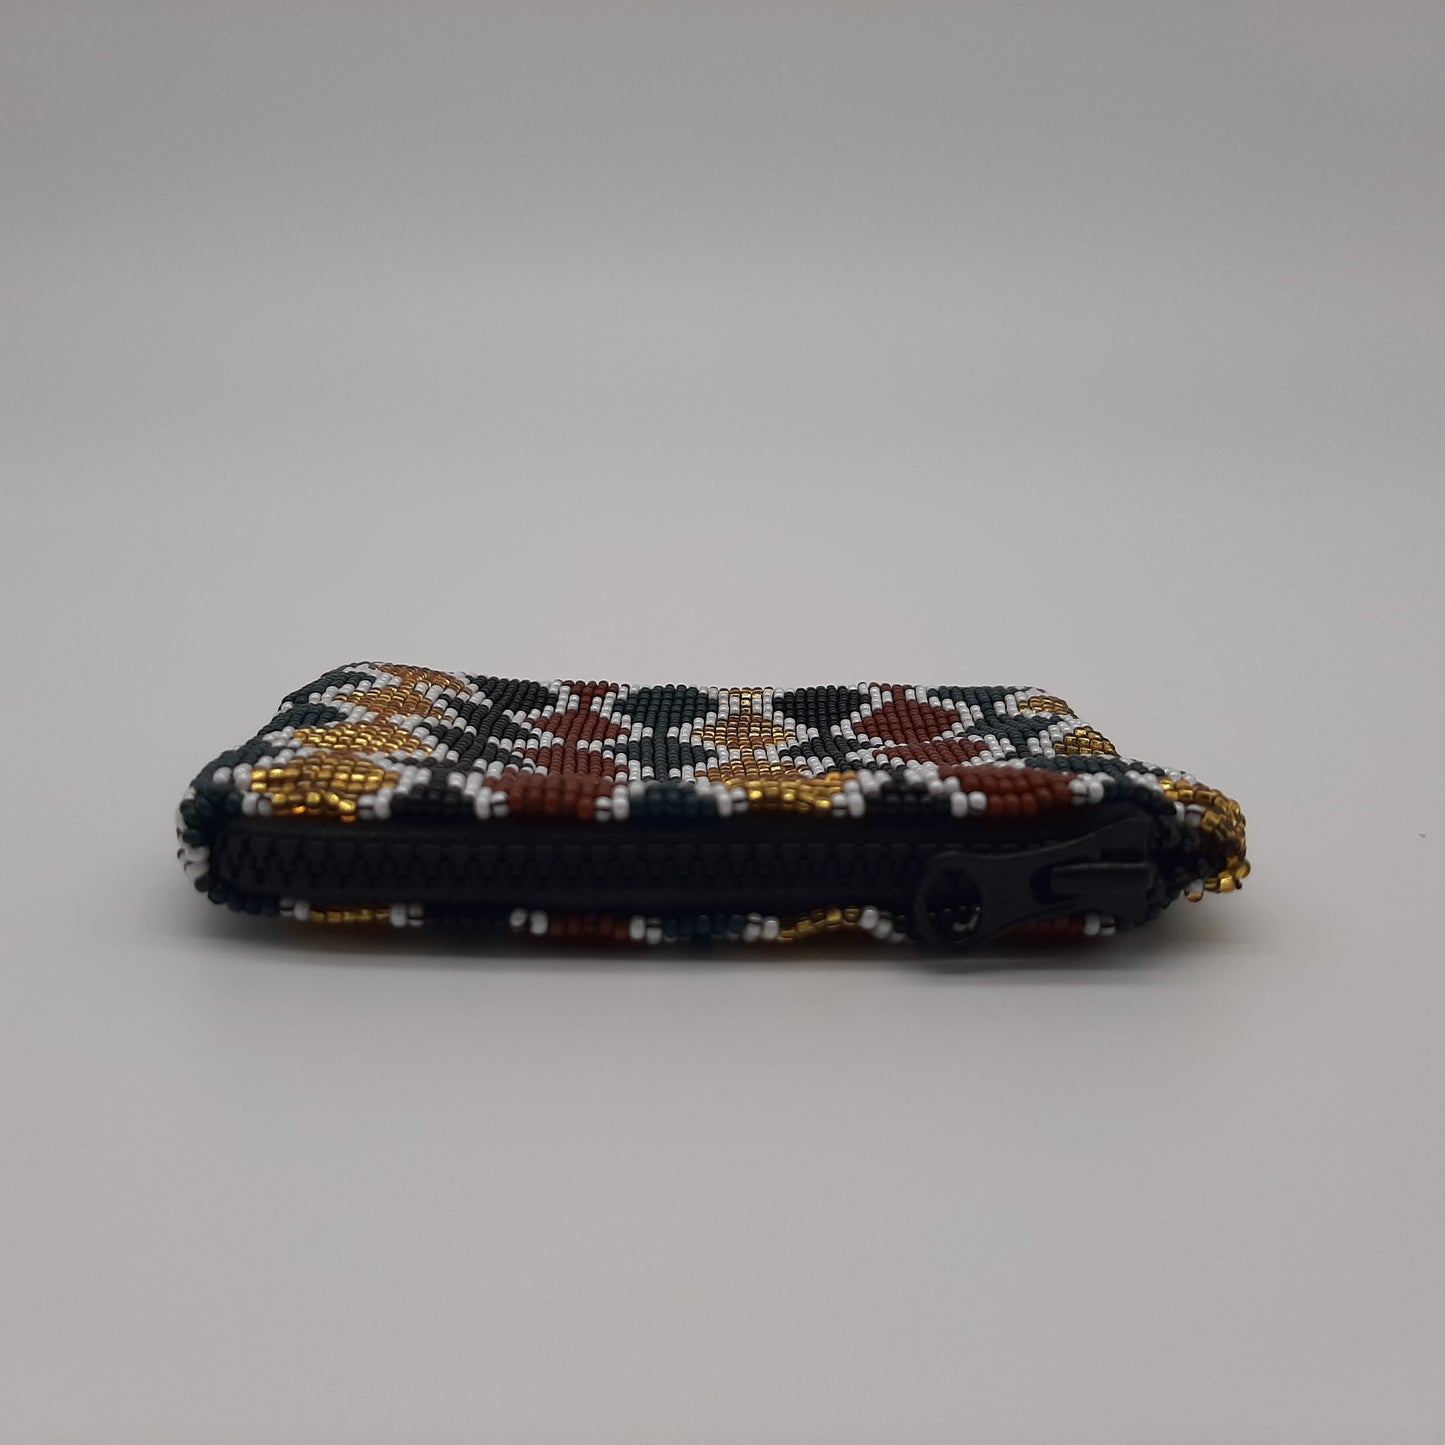 Multi waves Glass Bead Square Coin Purse